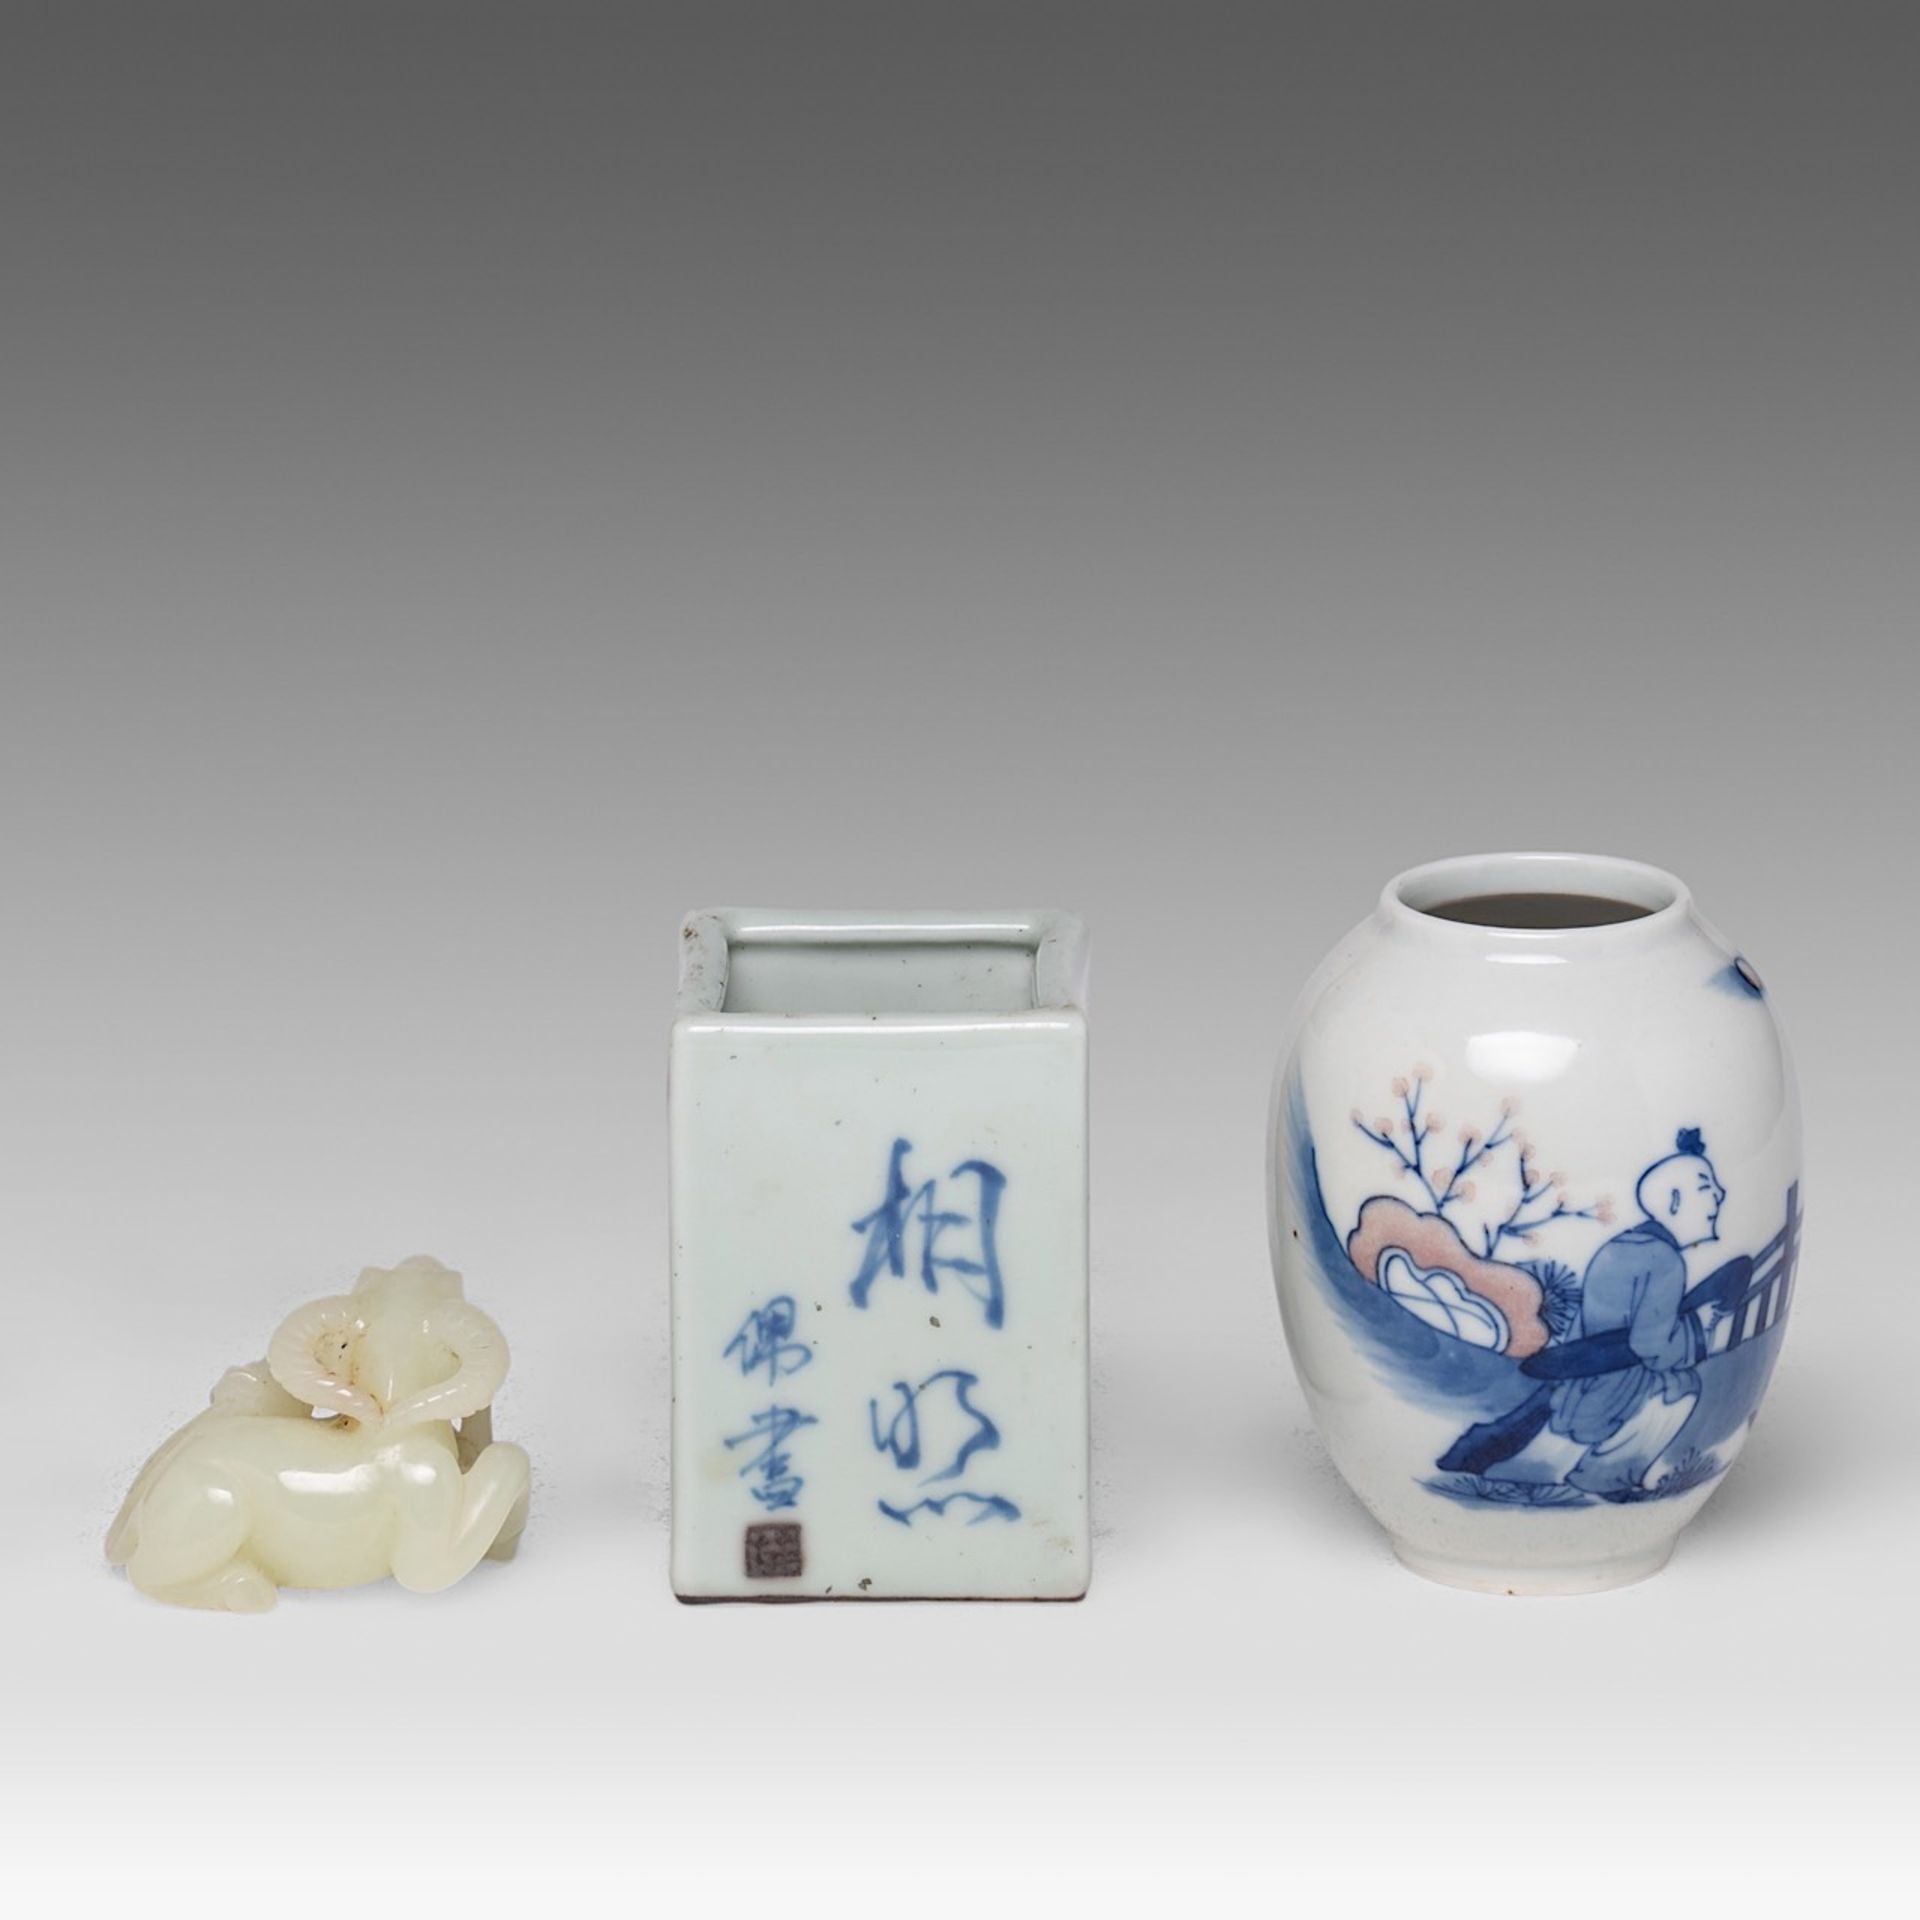 A collection of four Chinese scholar's objects, incl. a brush pot with inscriptions, late 18thC - ad - Image 4 of 29